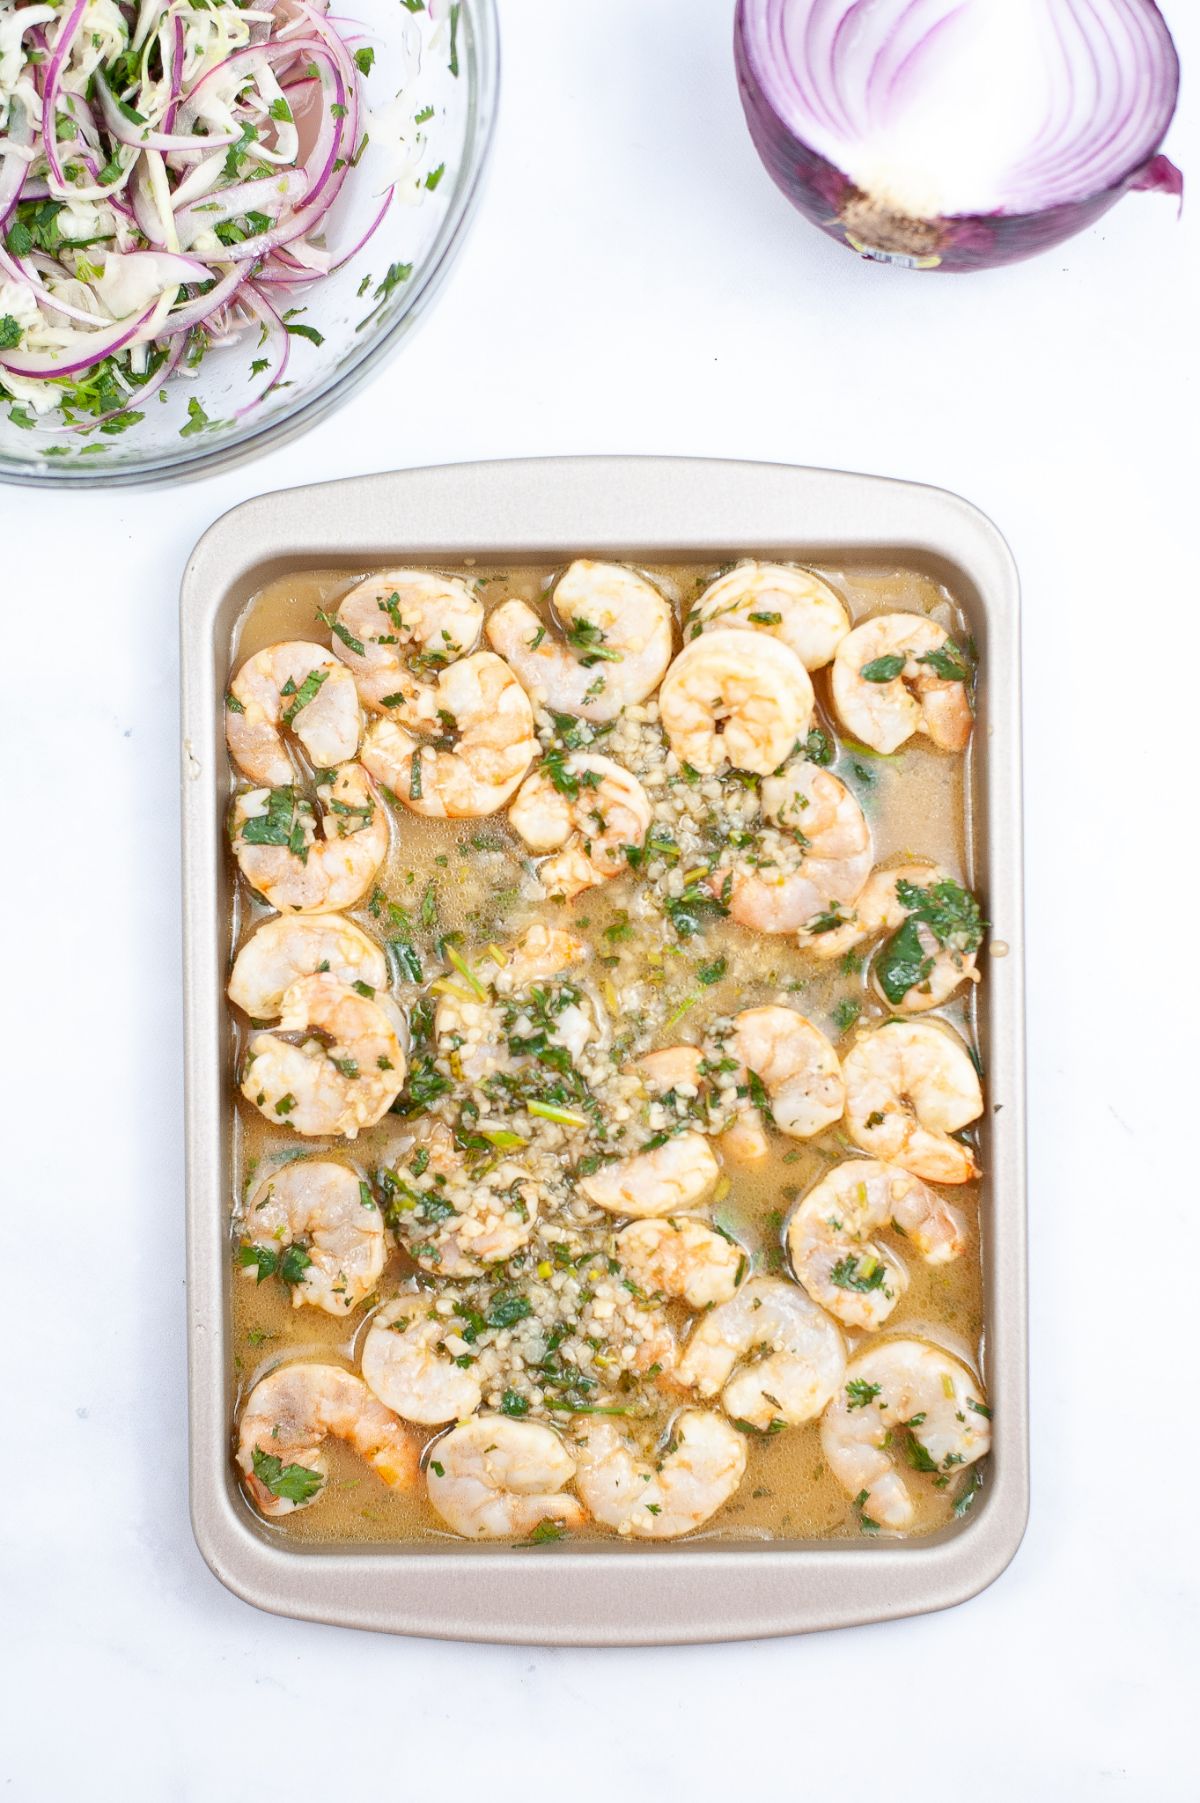 Cooked marinated shrimp in a baking pan